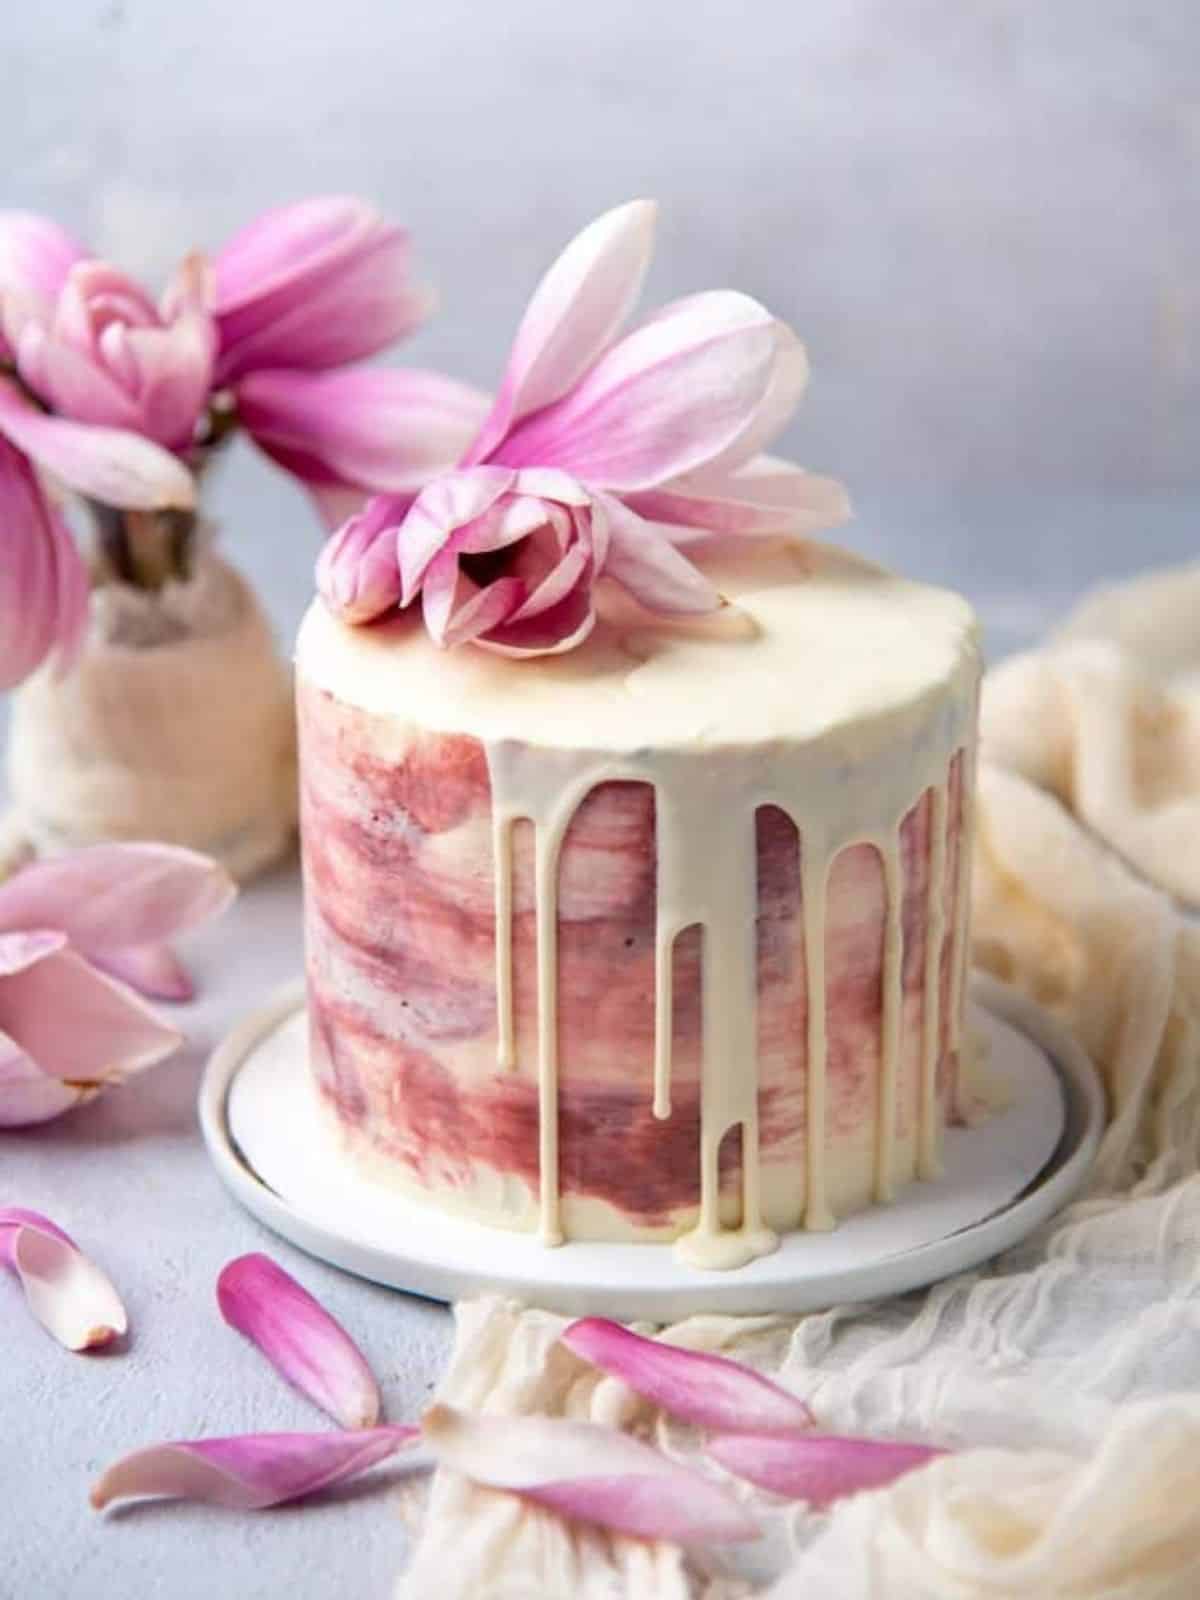 Ginger Cardamom Cake drizzled with Rose Buttercream.